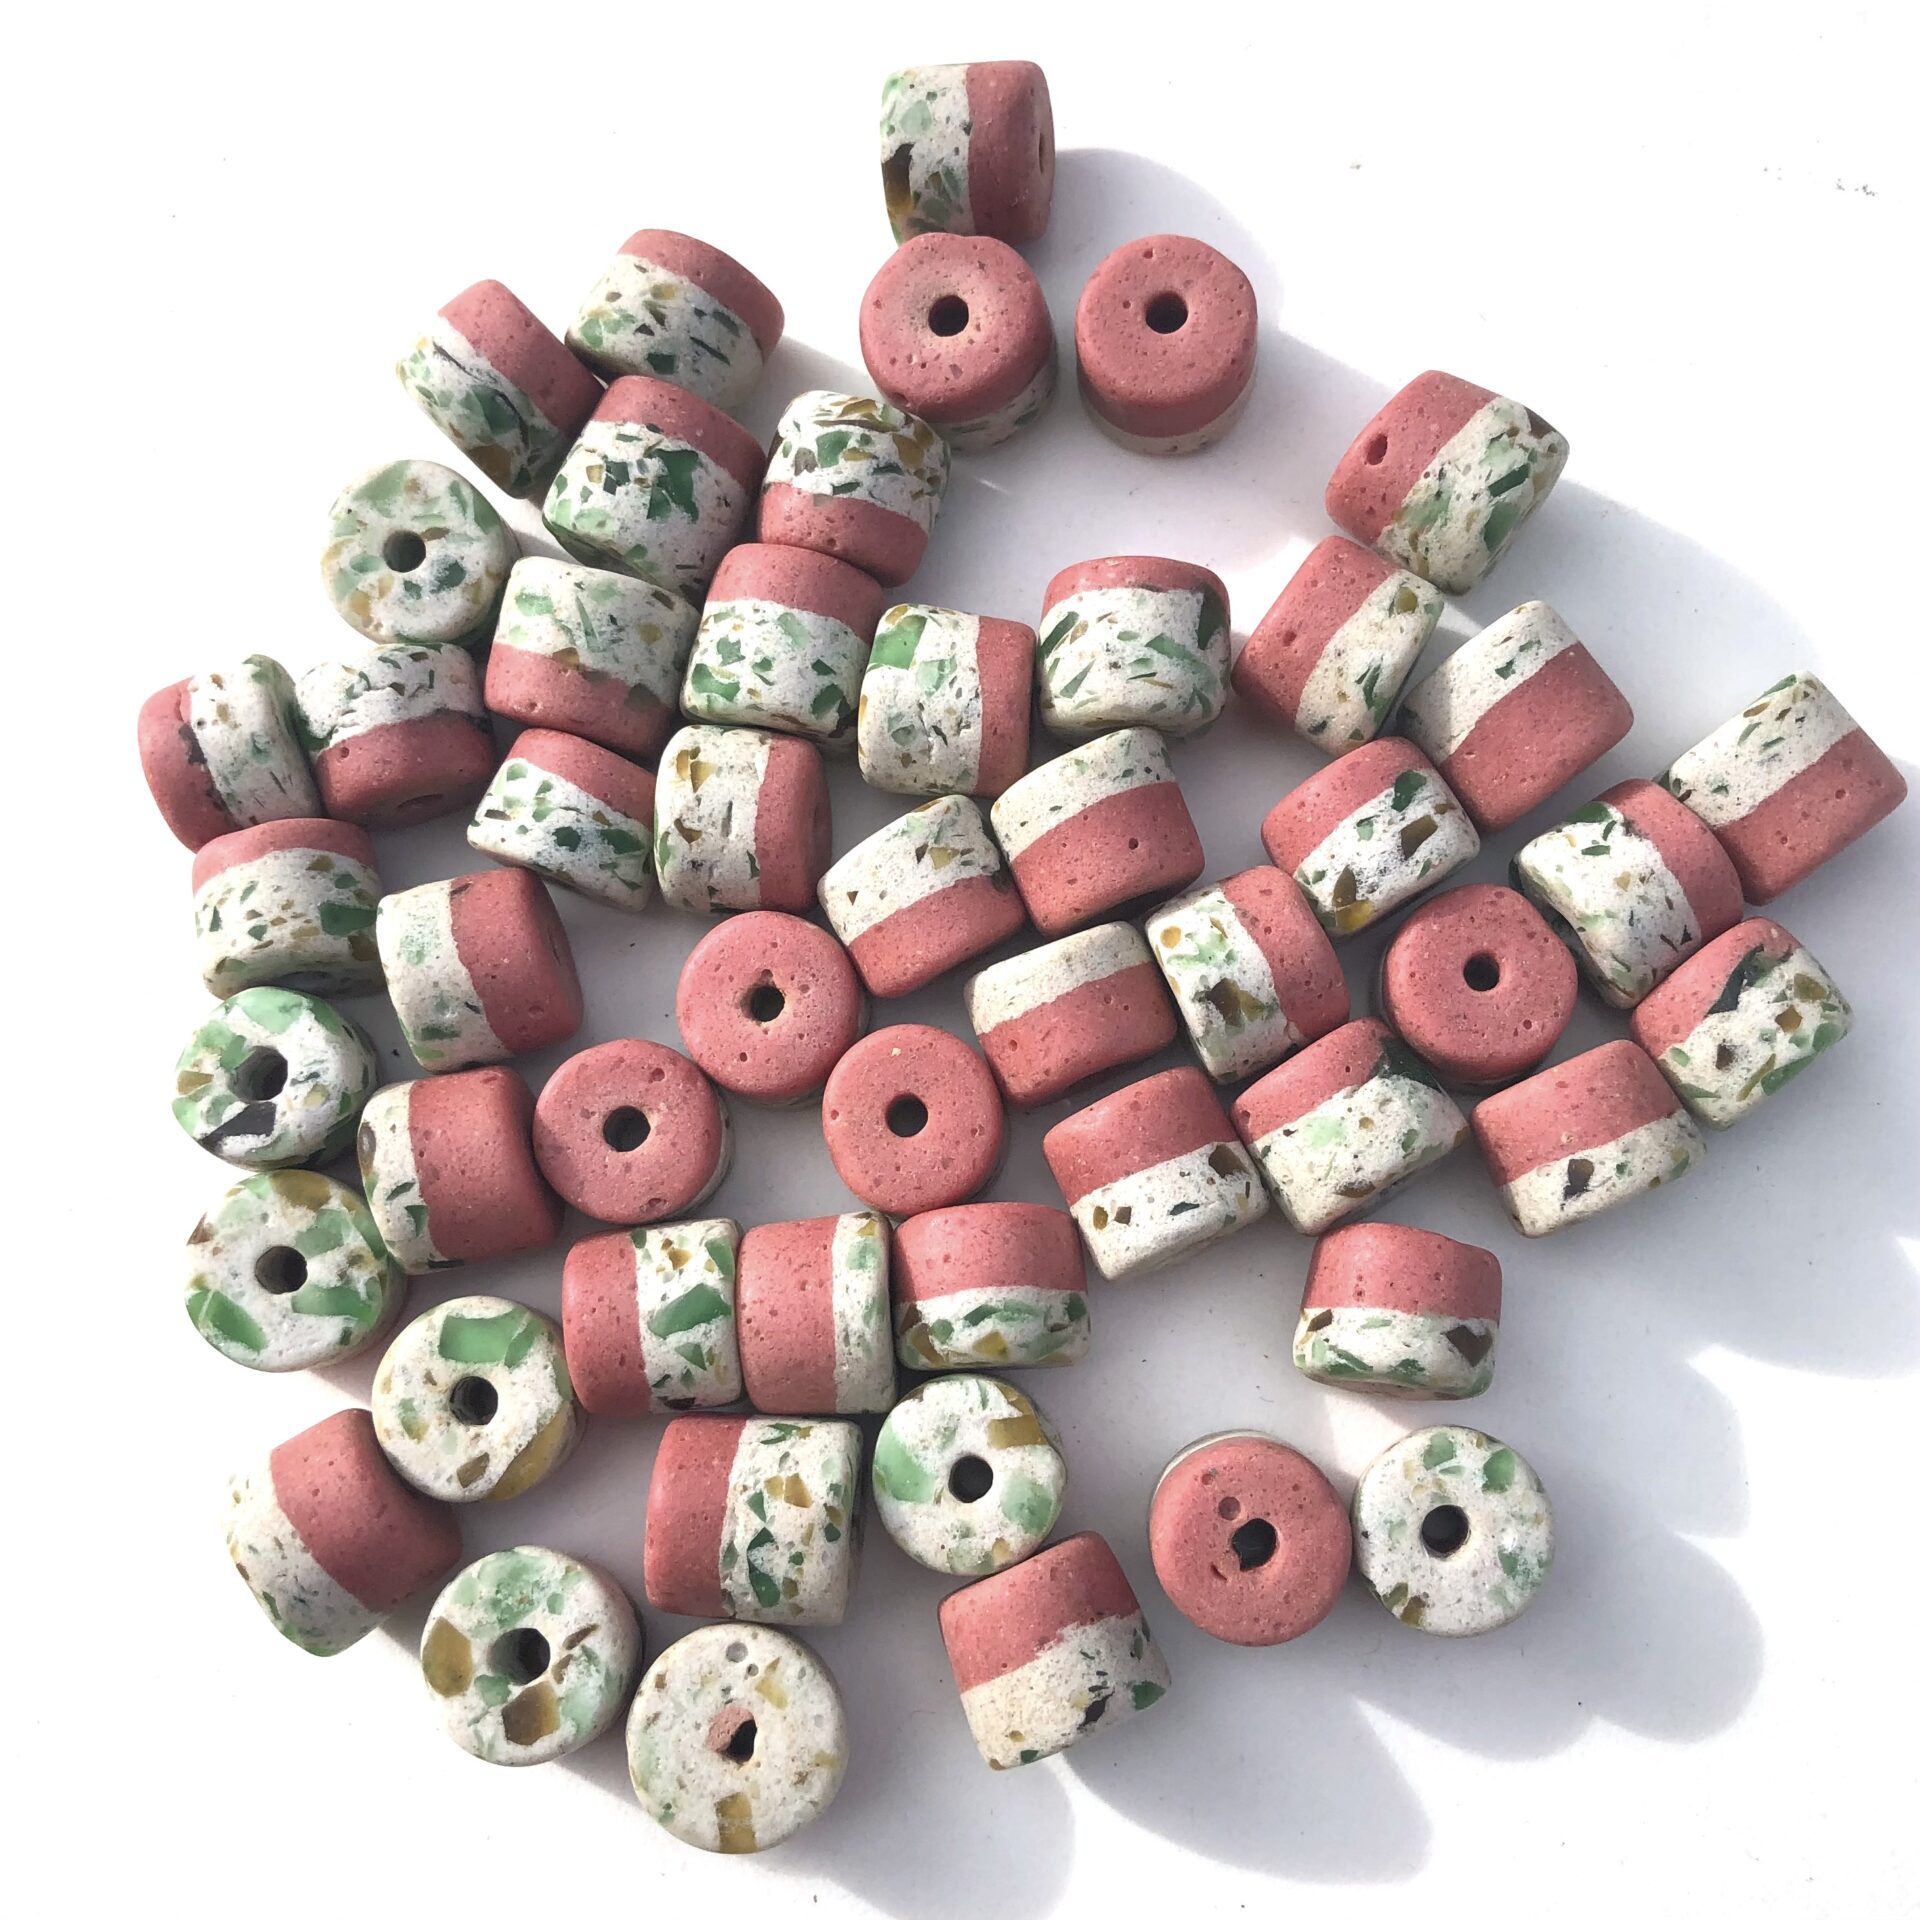 Sandcast Recycled Glass Beads